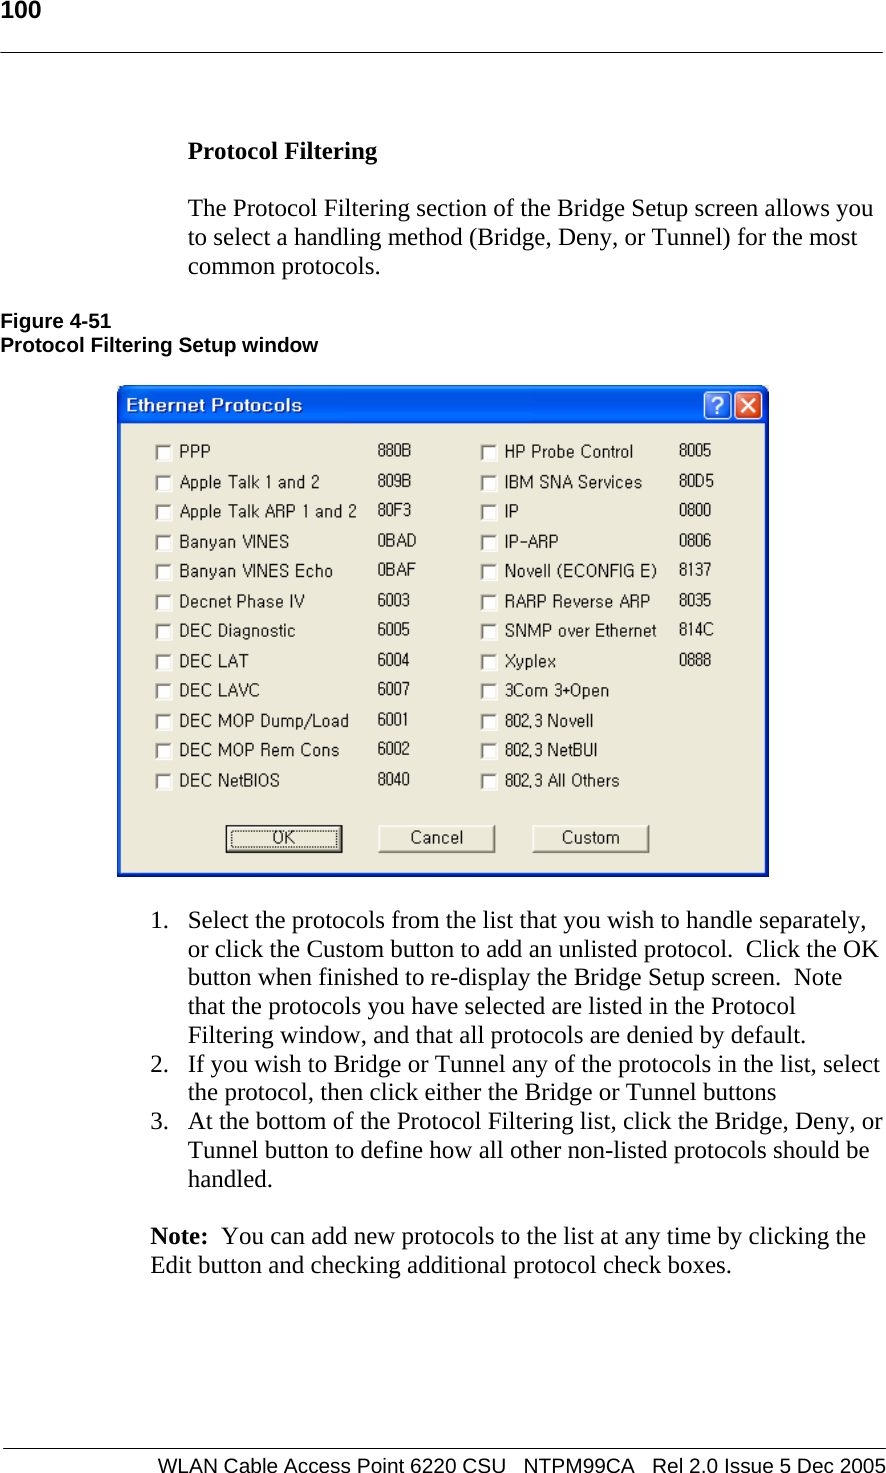   100  WLAN Cable Access Point 6220 CSU   NTPM99CA   Rel 2.0 Issue 5 Dec 2005  Protocol Filtering    The Protocol Filtering section of the Bridge Setup screen allows you to select a handling method (Bridge, Deny, or Tunnel) for the most common protocols.    Figure 4-51 Protocol Filtering Setup window    1. Select the protocols from the list that you wish to handle separately, or click the Custom button to add an unlisted protocol.  Click the OK button when finished to re-display the Bridge Setup screen.  Note that the protocols you have selected are listed in the Protocol Filtering window, and that all protocols are denied by default. 2. If you wish to Bridge or Tunnel any of the protocols in the list, select the protocol, then click either the Bridge or Tunnel buttons 3. At the bottom of the Protocol Filtering list, click the Bridge, Deny, or Tunnel button to define how all other non-listed protocols should be handled.  Note:  You can add new protocols to the list at any time by clicking the Edit button and checking additional protocol check boxes. 